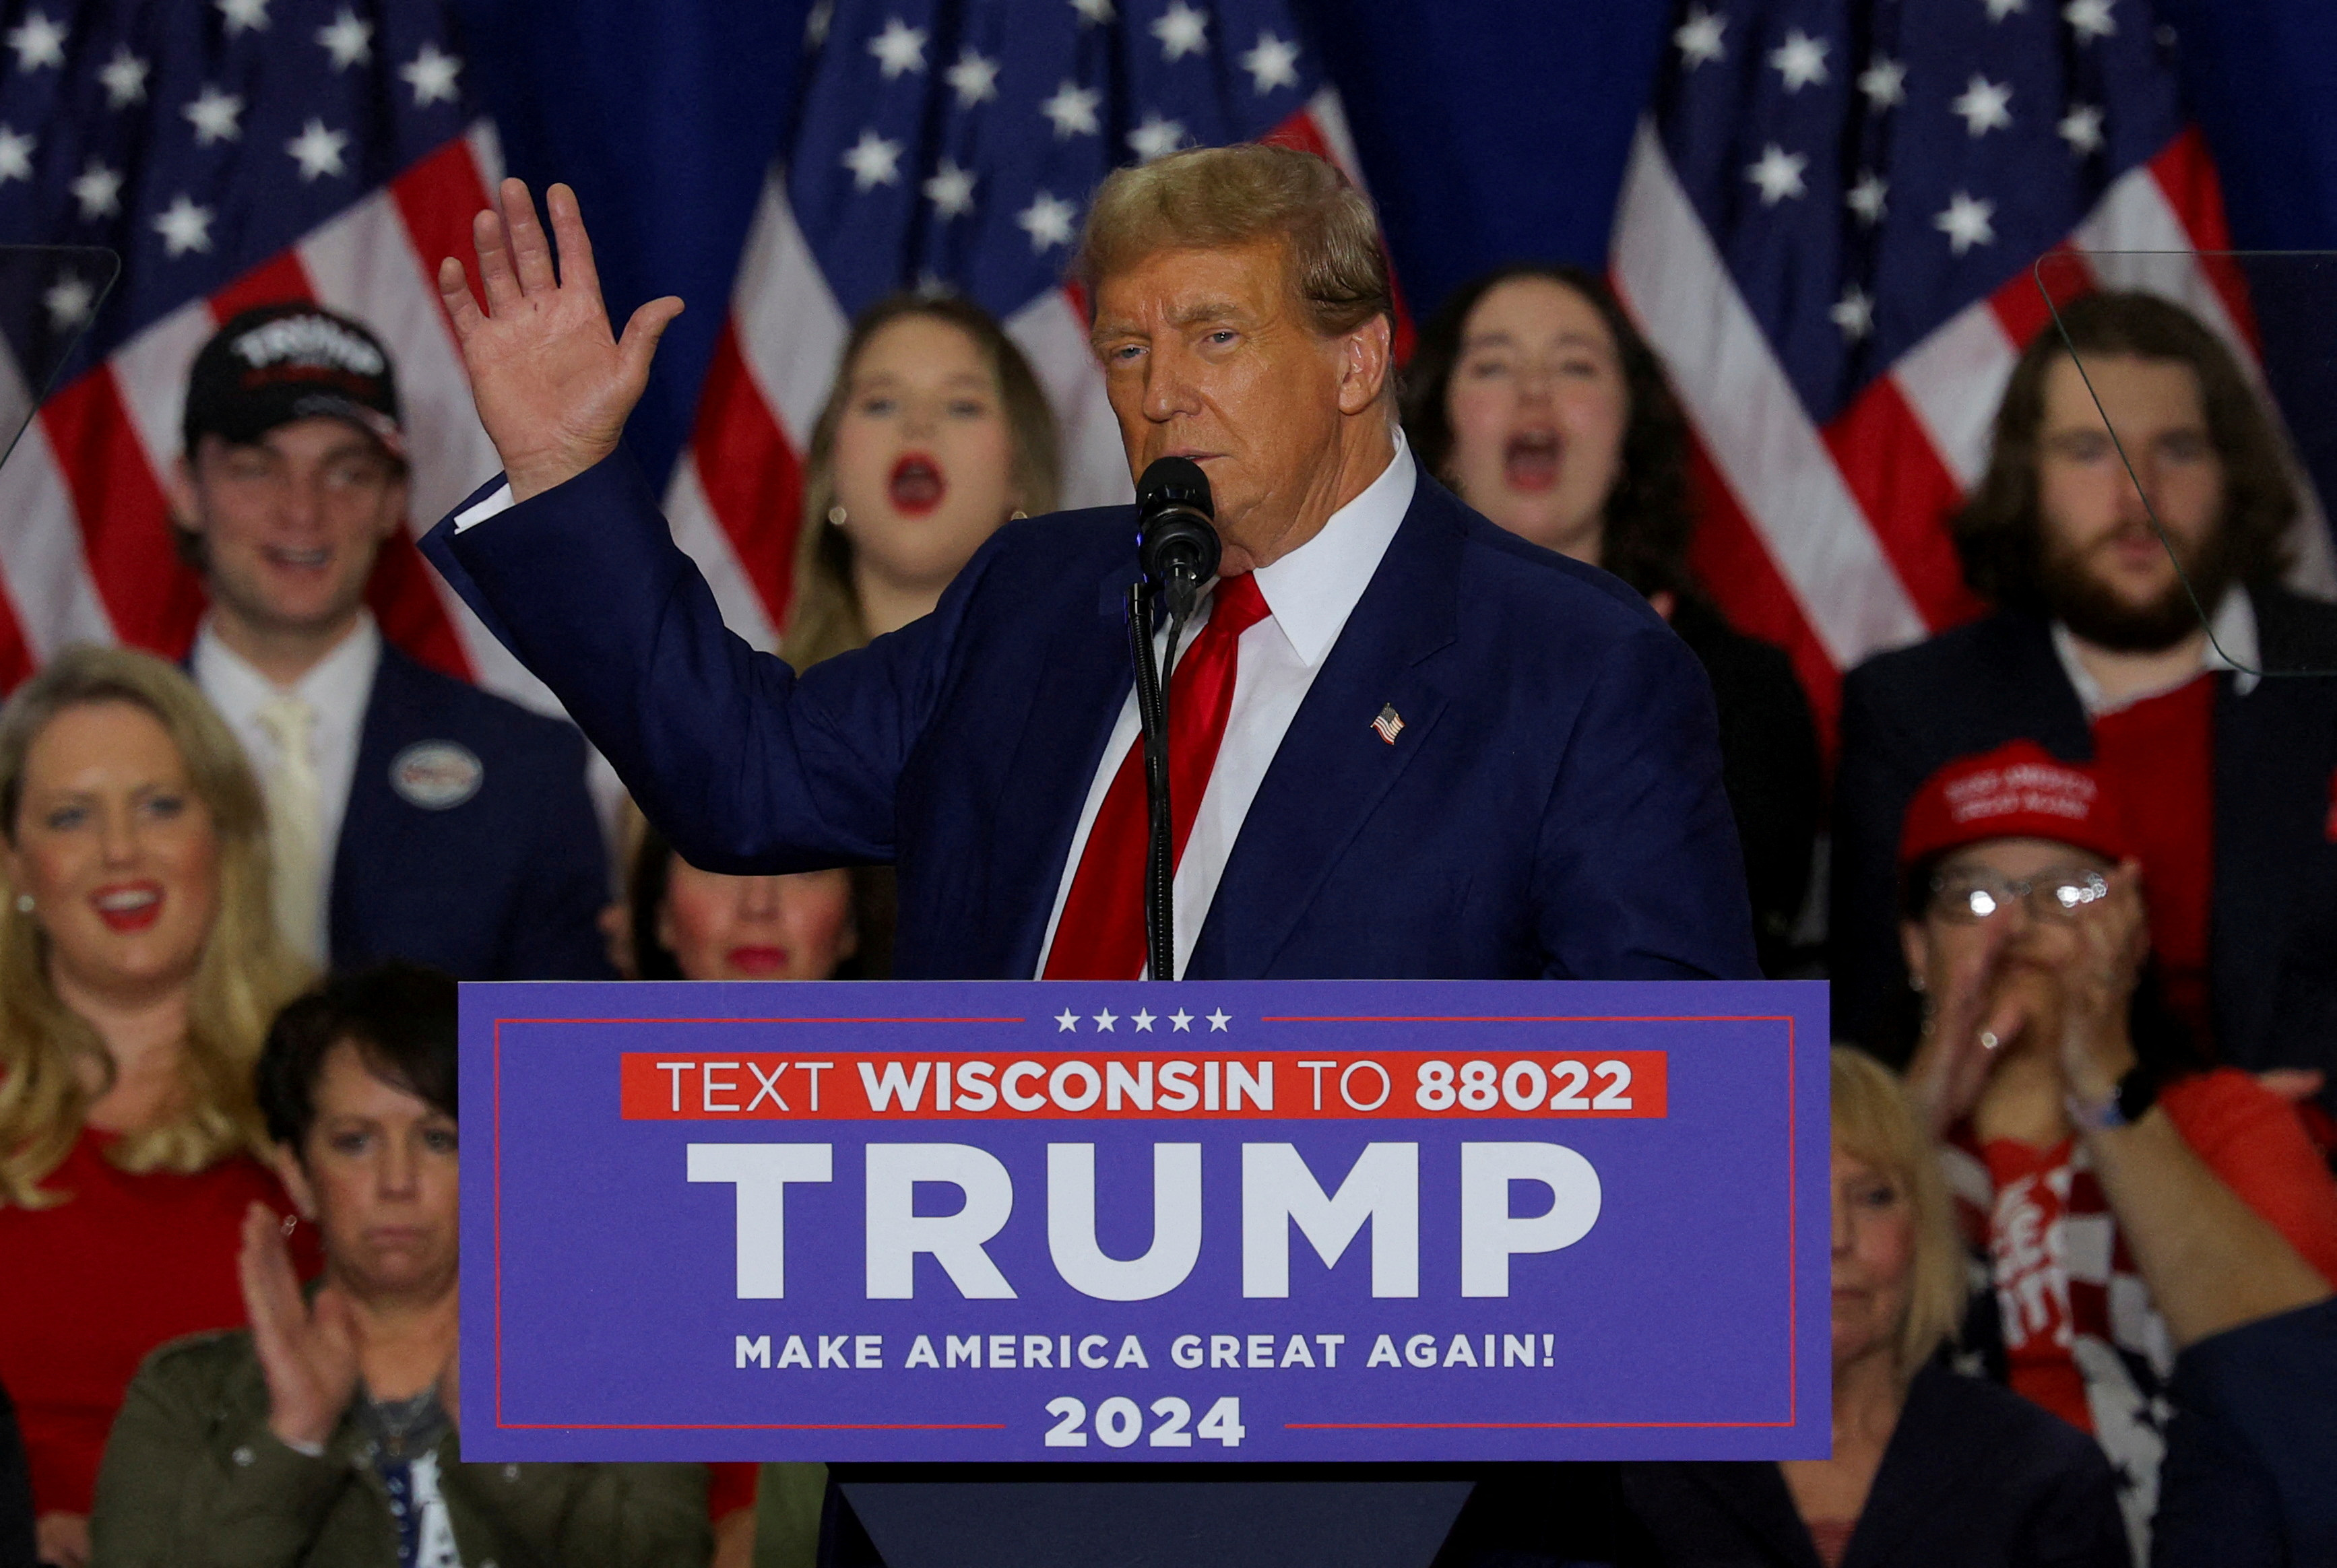 Republican presidential candidate and former U.S. President Donald Trump's campaign rally in Green Bay